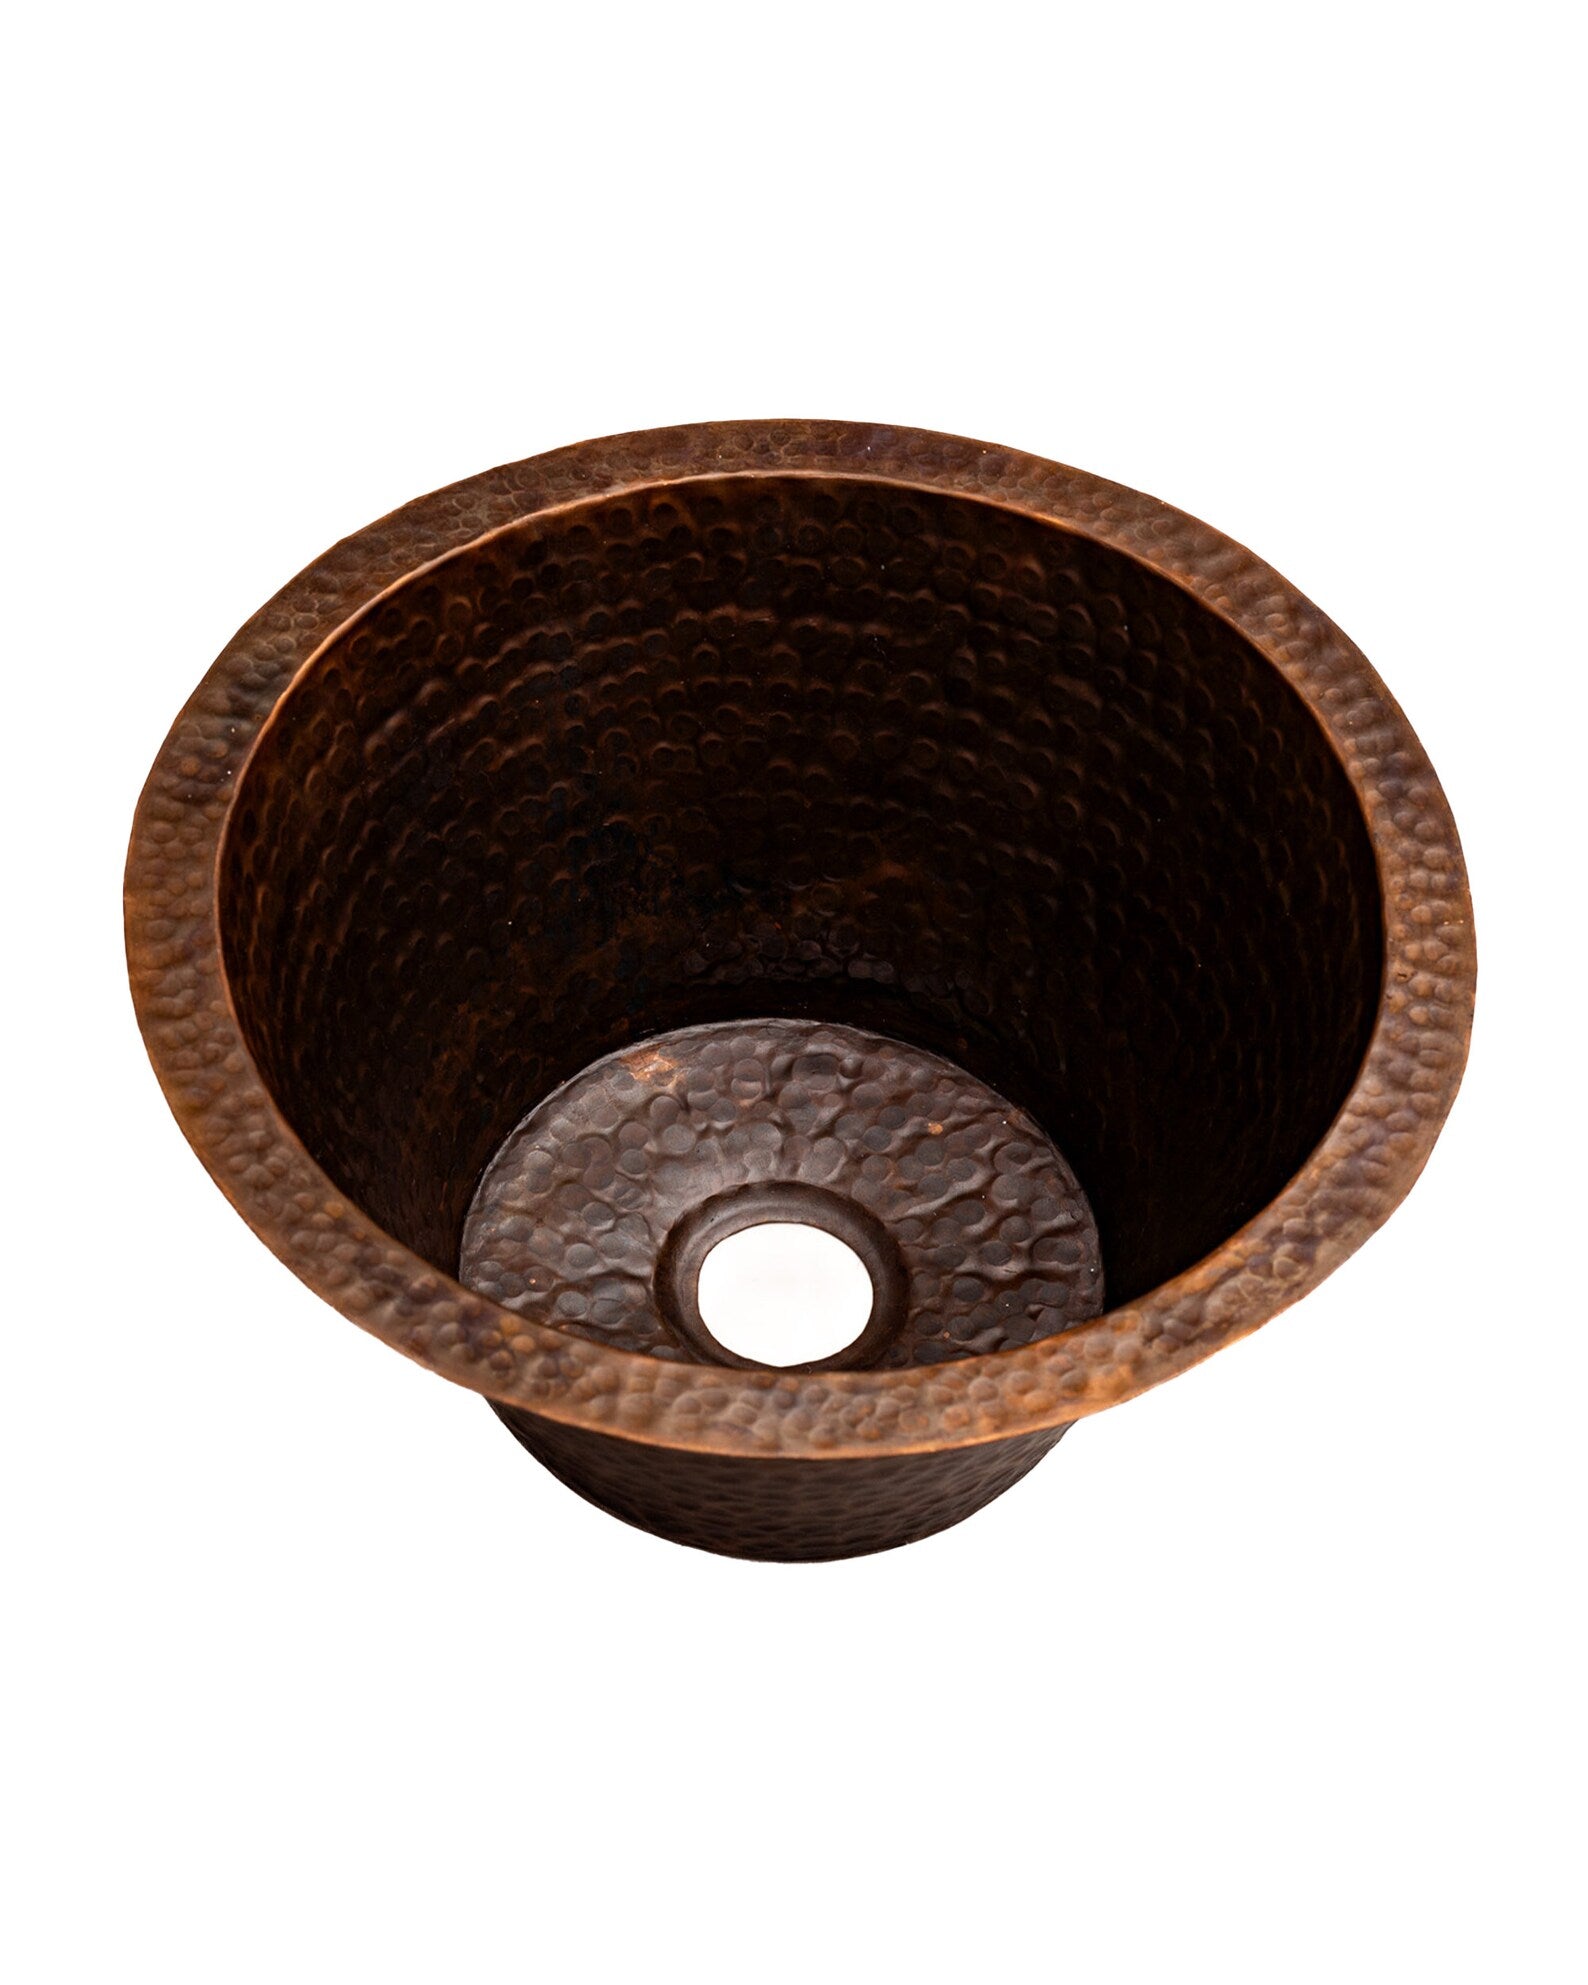 Aged Copper Round Bar Sink - Hammered Finish - Zayian